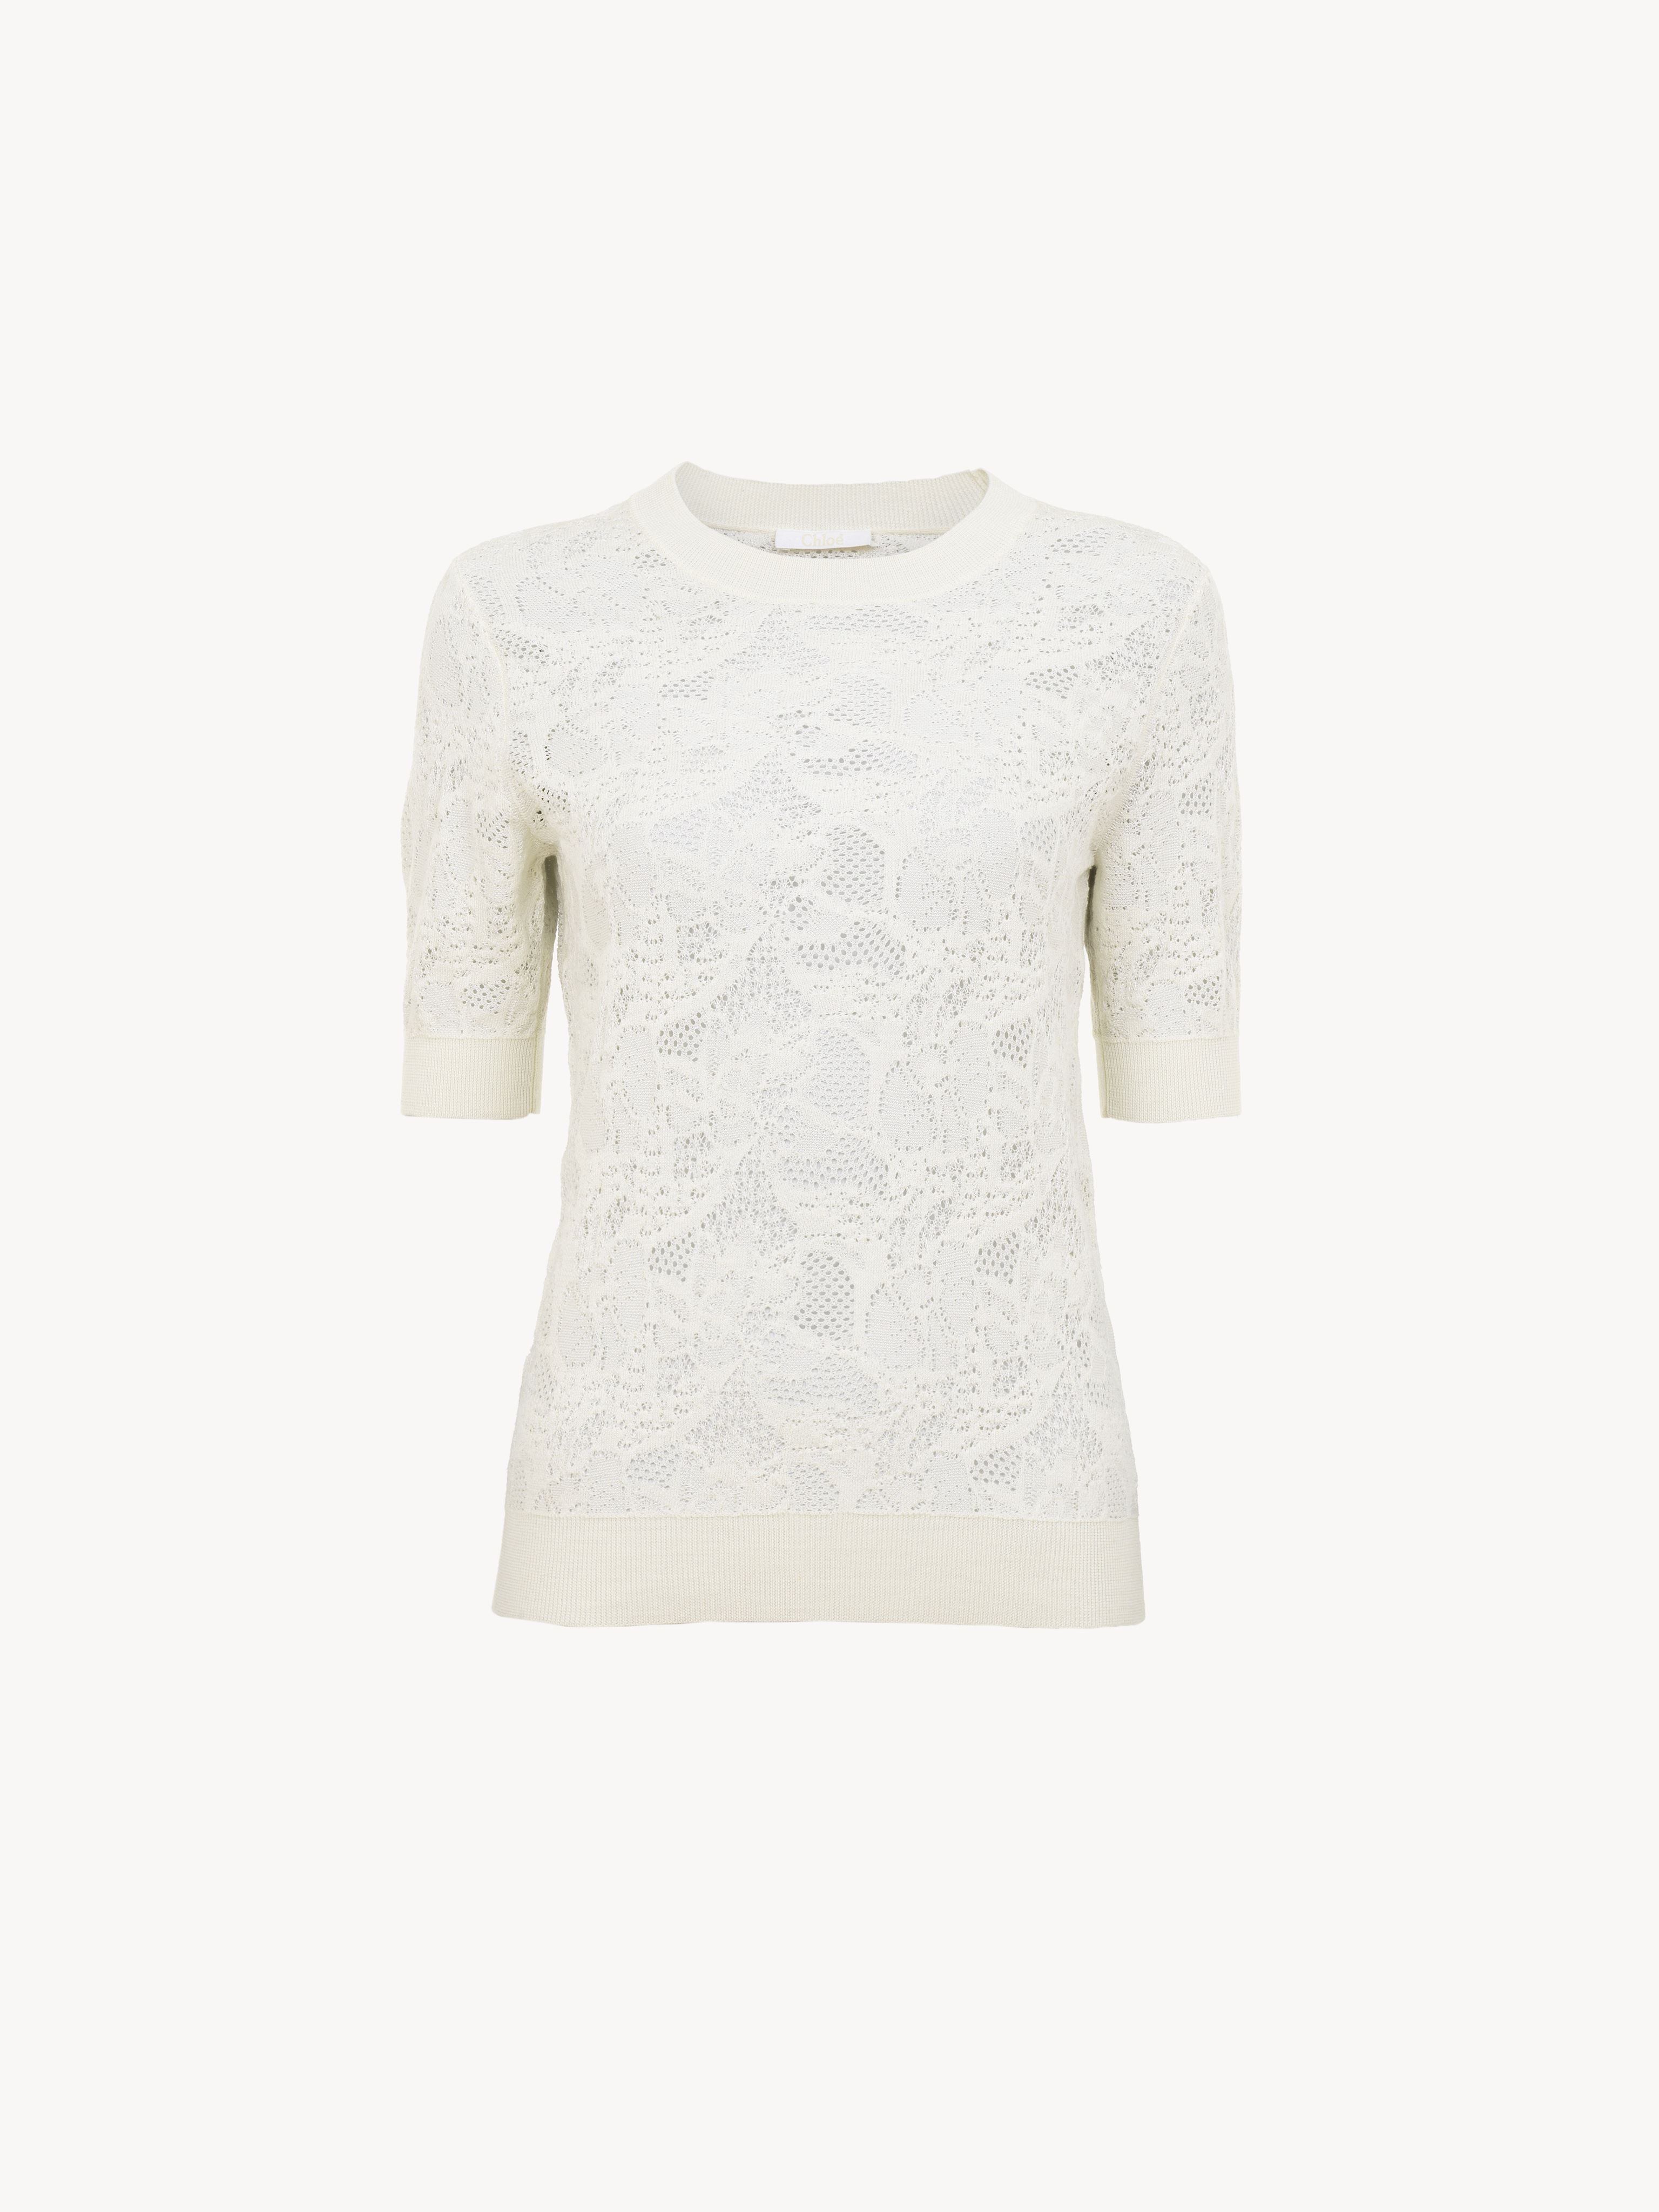 Chloé Pull Manches Courtes Col Rond Femme Blanc Taille Xs 100% Laine